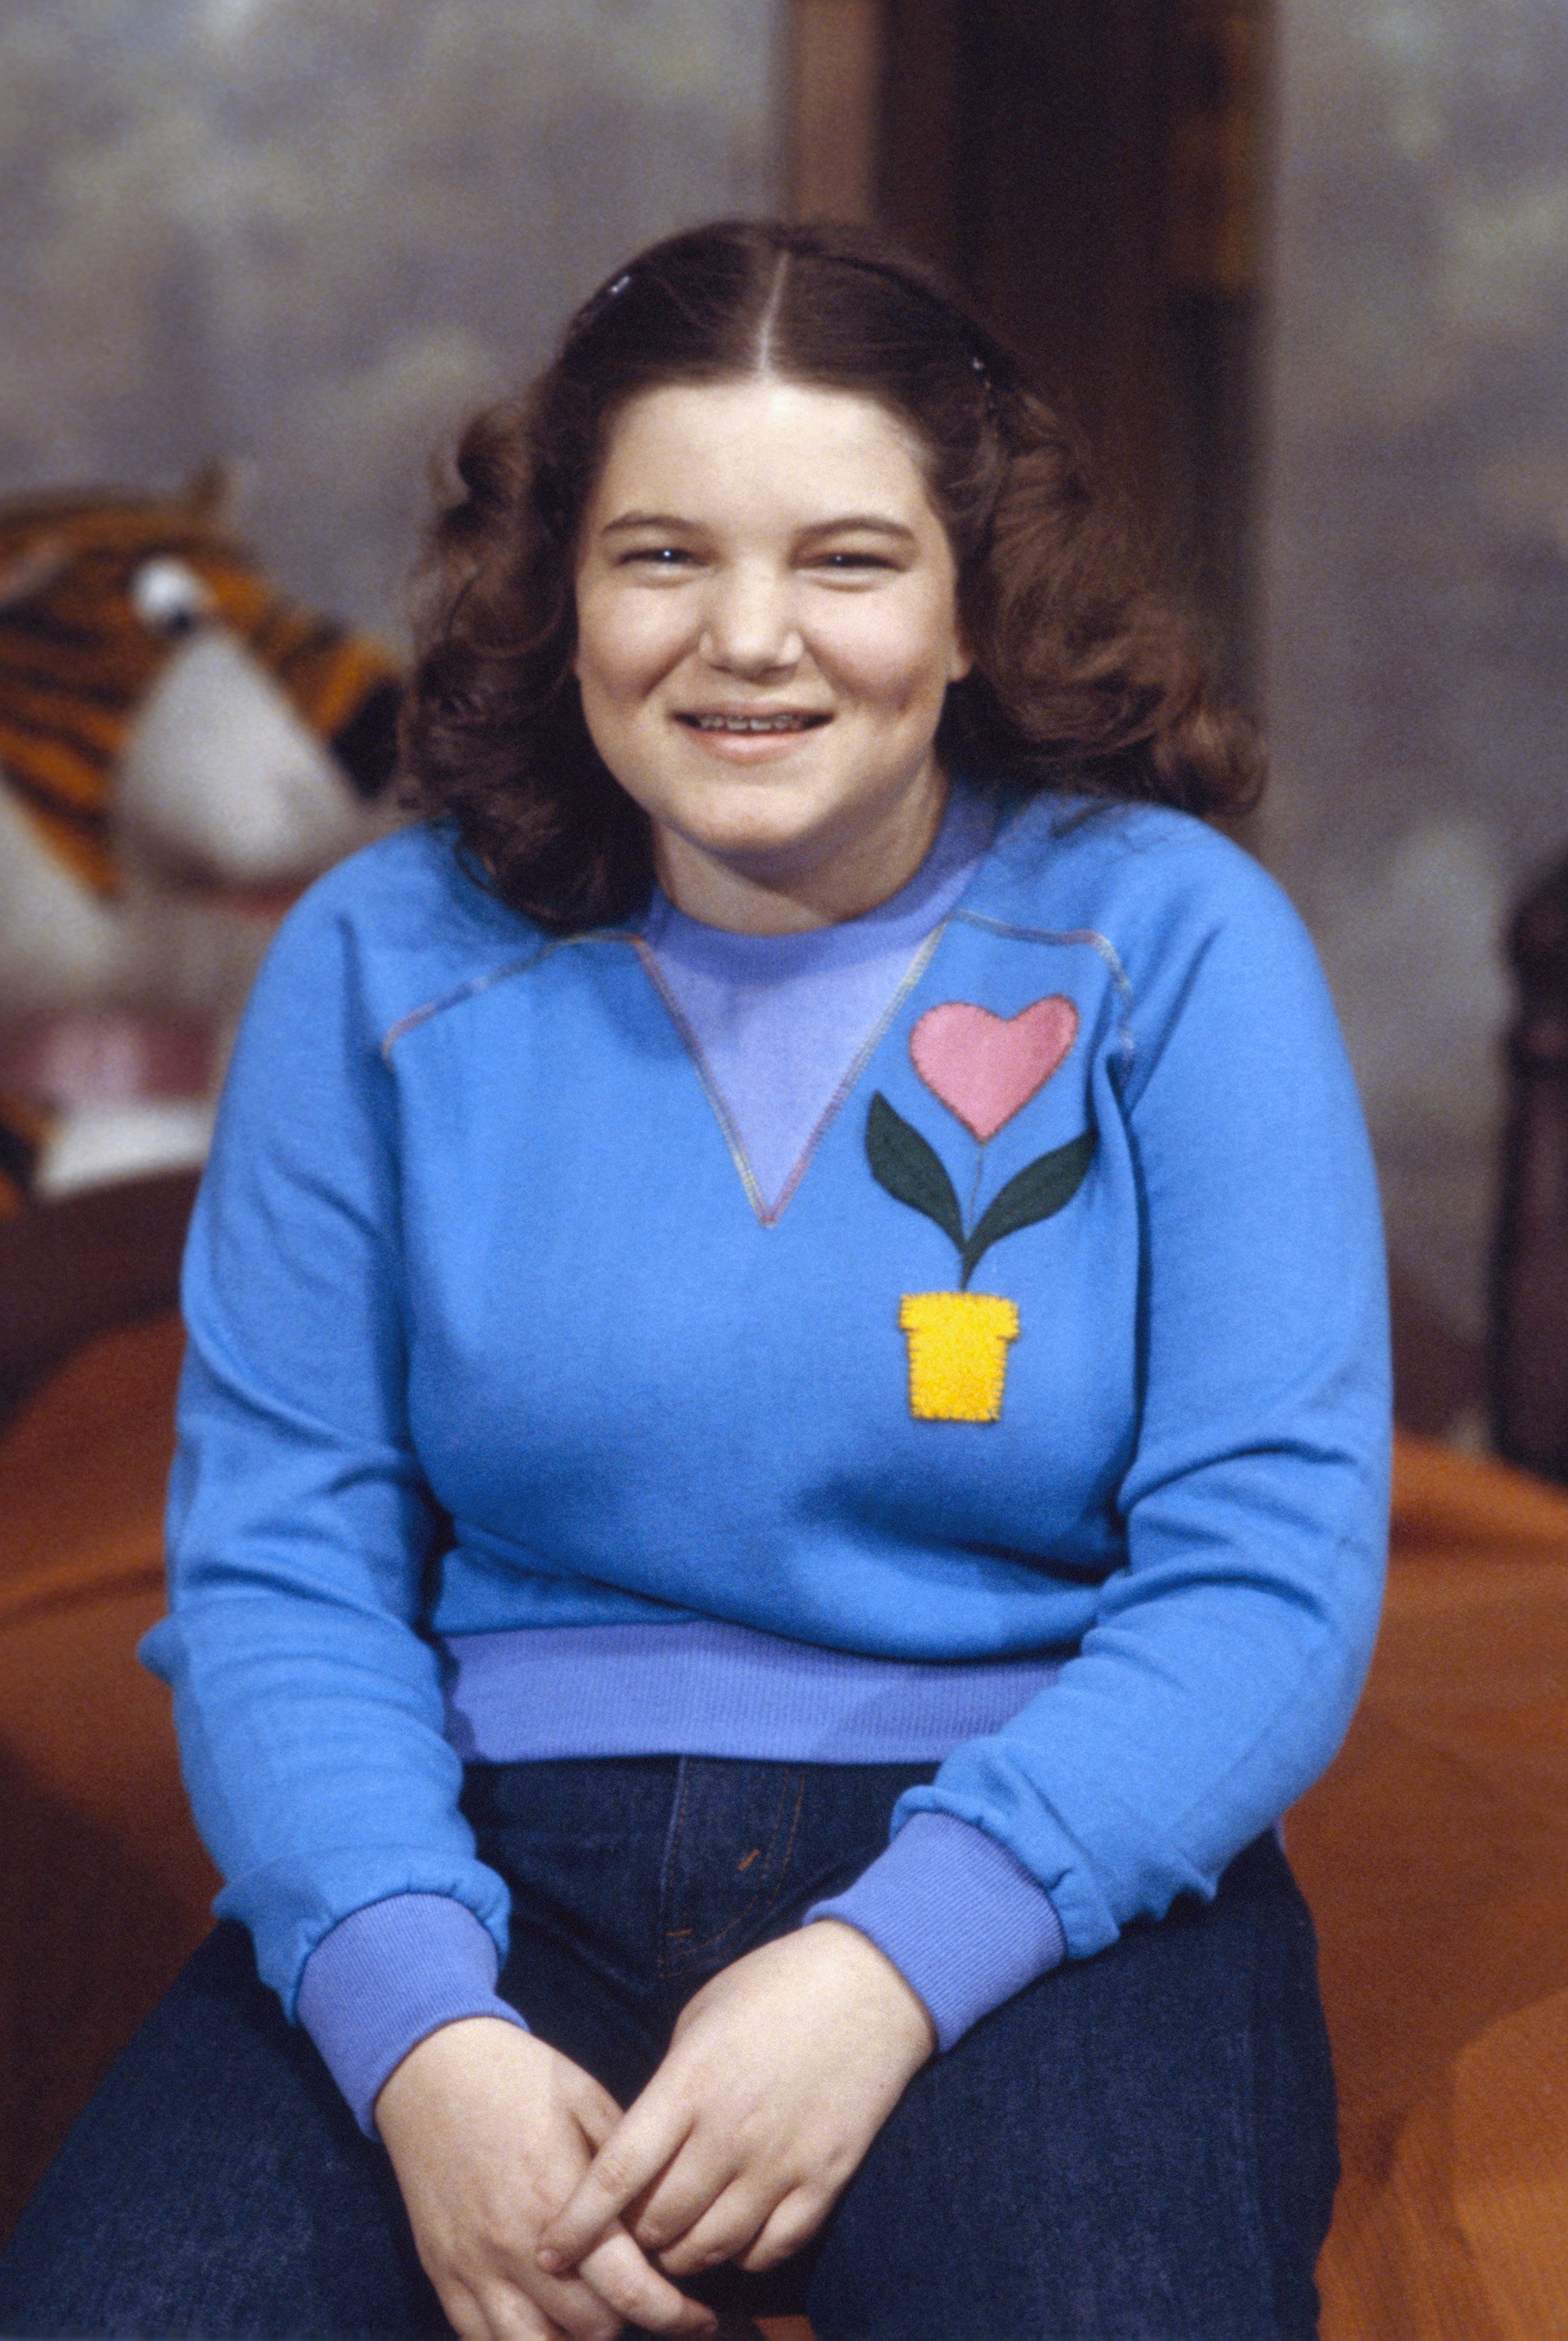 Actress Mindy Cohn as Natalie Green in the American sitcom, "The Facts of Life," on January 1, 2000 | Source: Getty Images